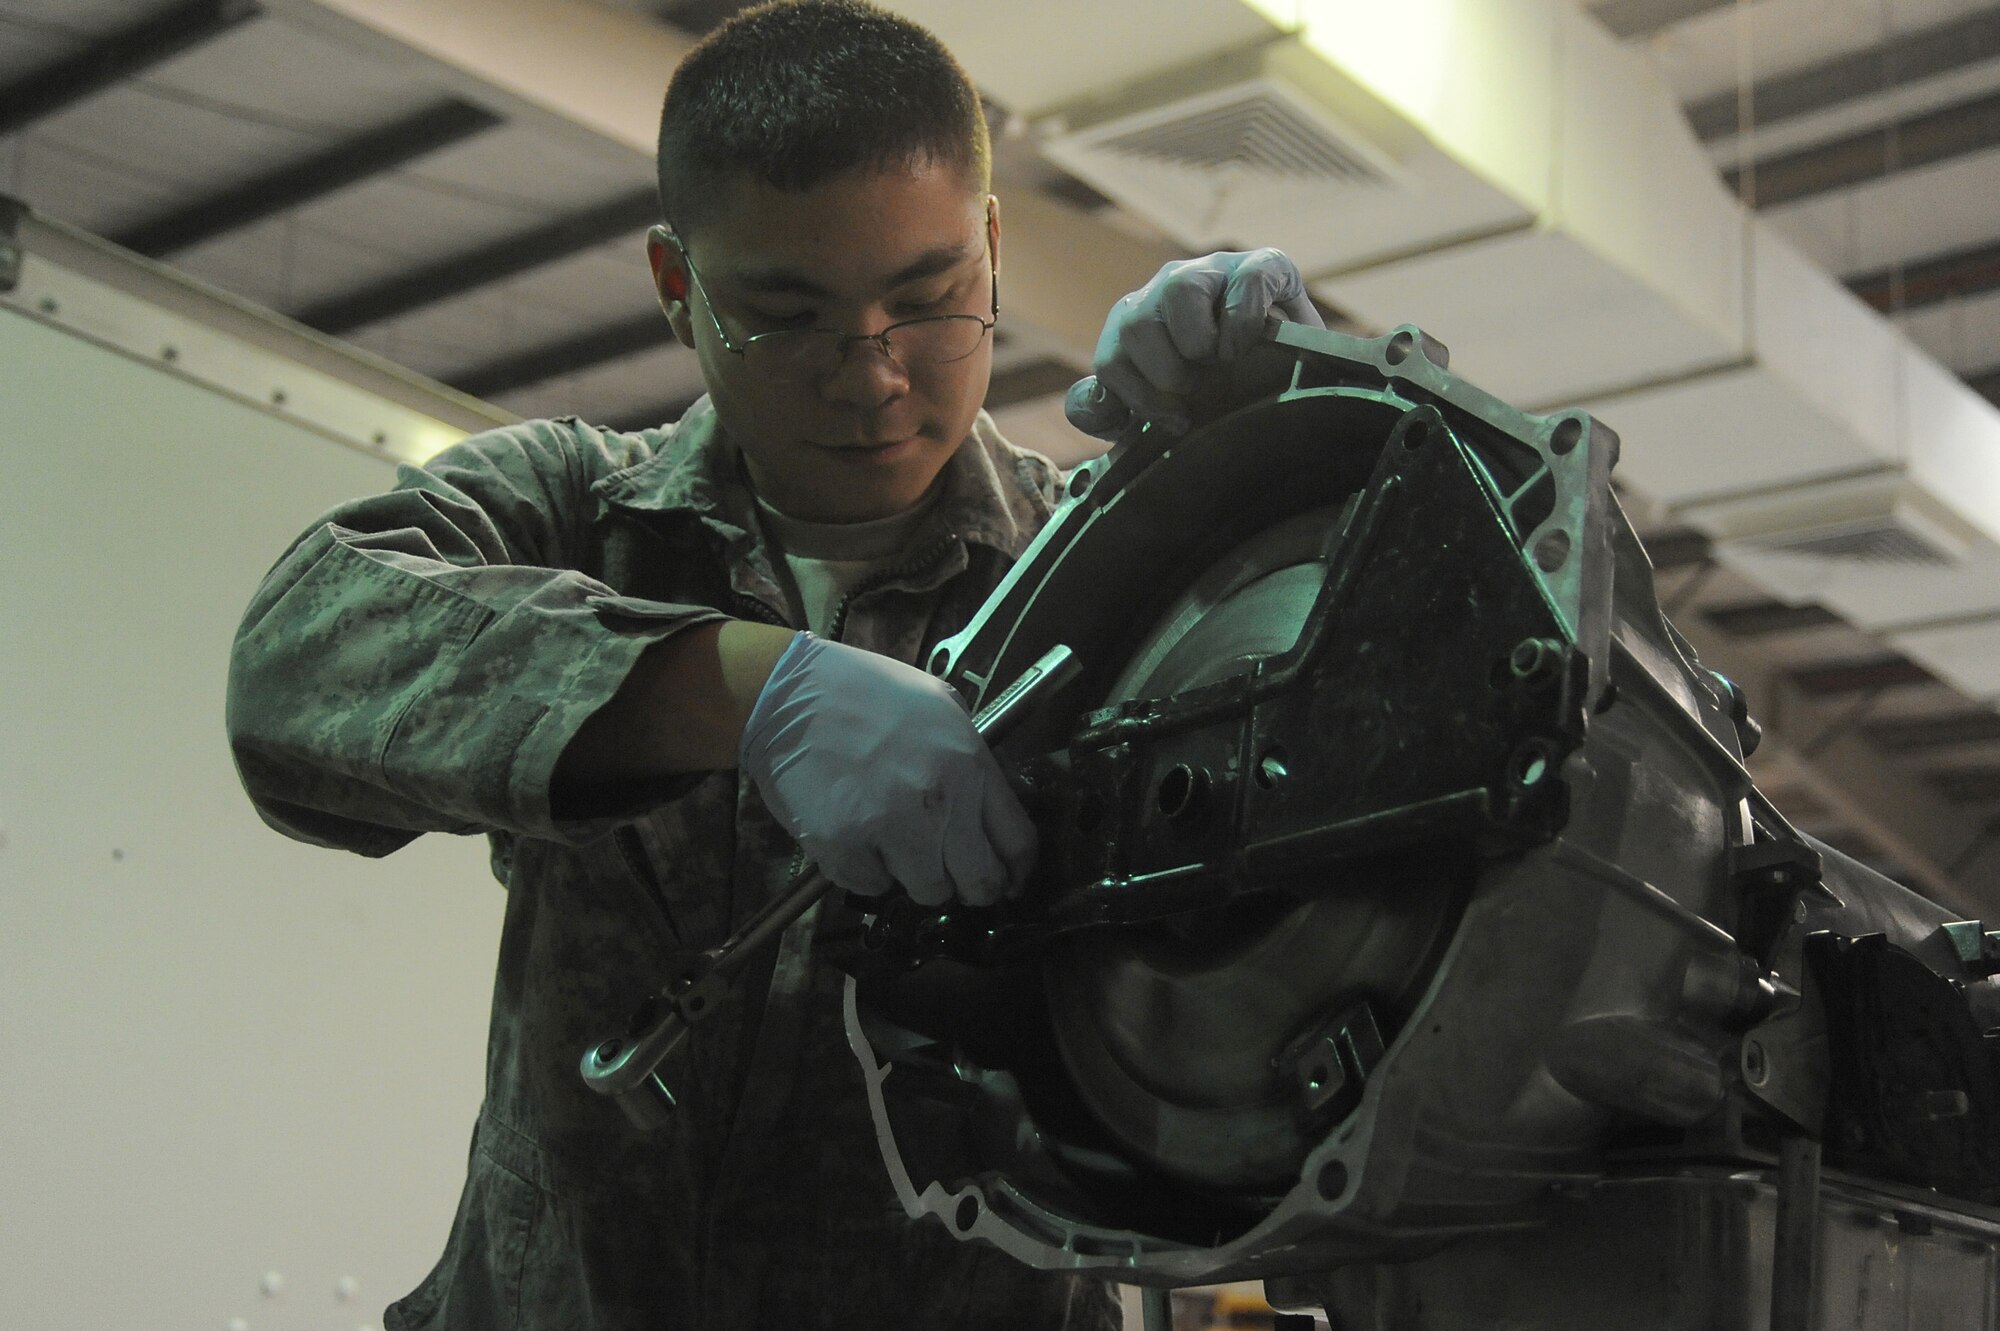 Senior Airman Michael Jakubec, 380th Expeditionary Logistics Readiness Squadron, vehicle maintenance, takes off a torque converter shield from a transmission, April 26 at an undisclosed location in Southwest Asia. The shield is placed on the transmission to protect the torque converter during shipping. Airman Jakubec is deployed from Kadena AB, Japan and hails from Spanaway Wash.  (U.S. Air Force photo by Senior Airman Brian J. Ellis) (Released)